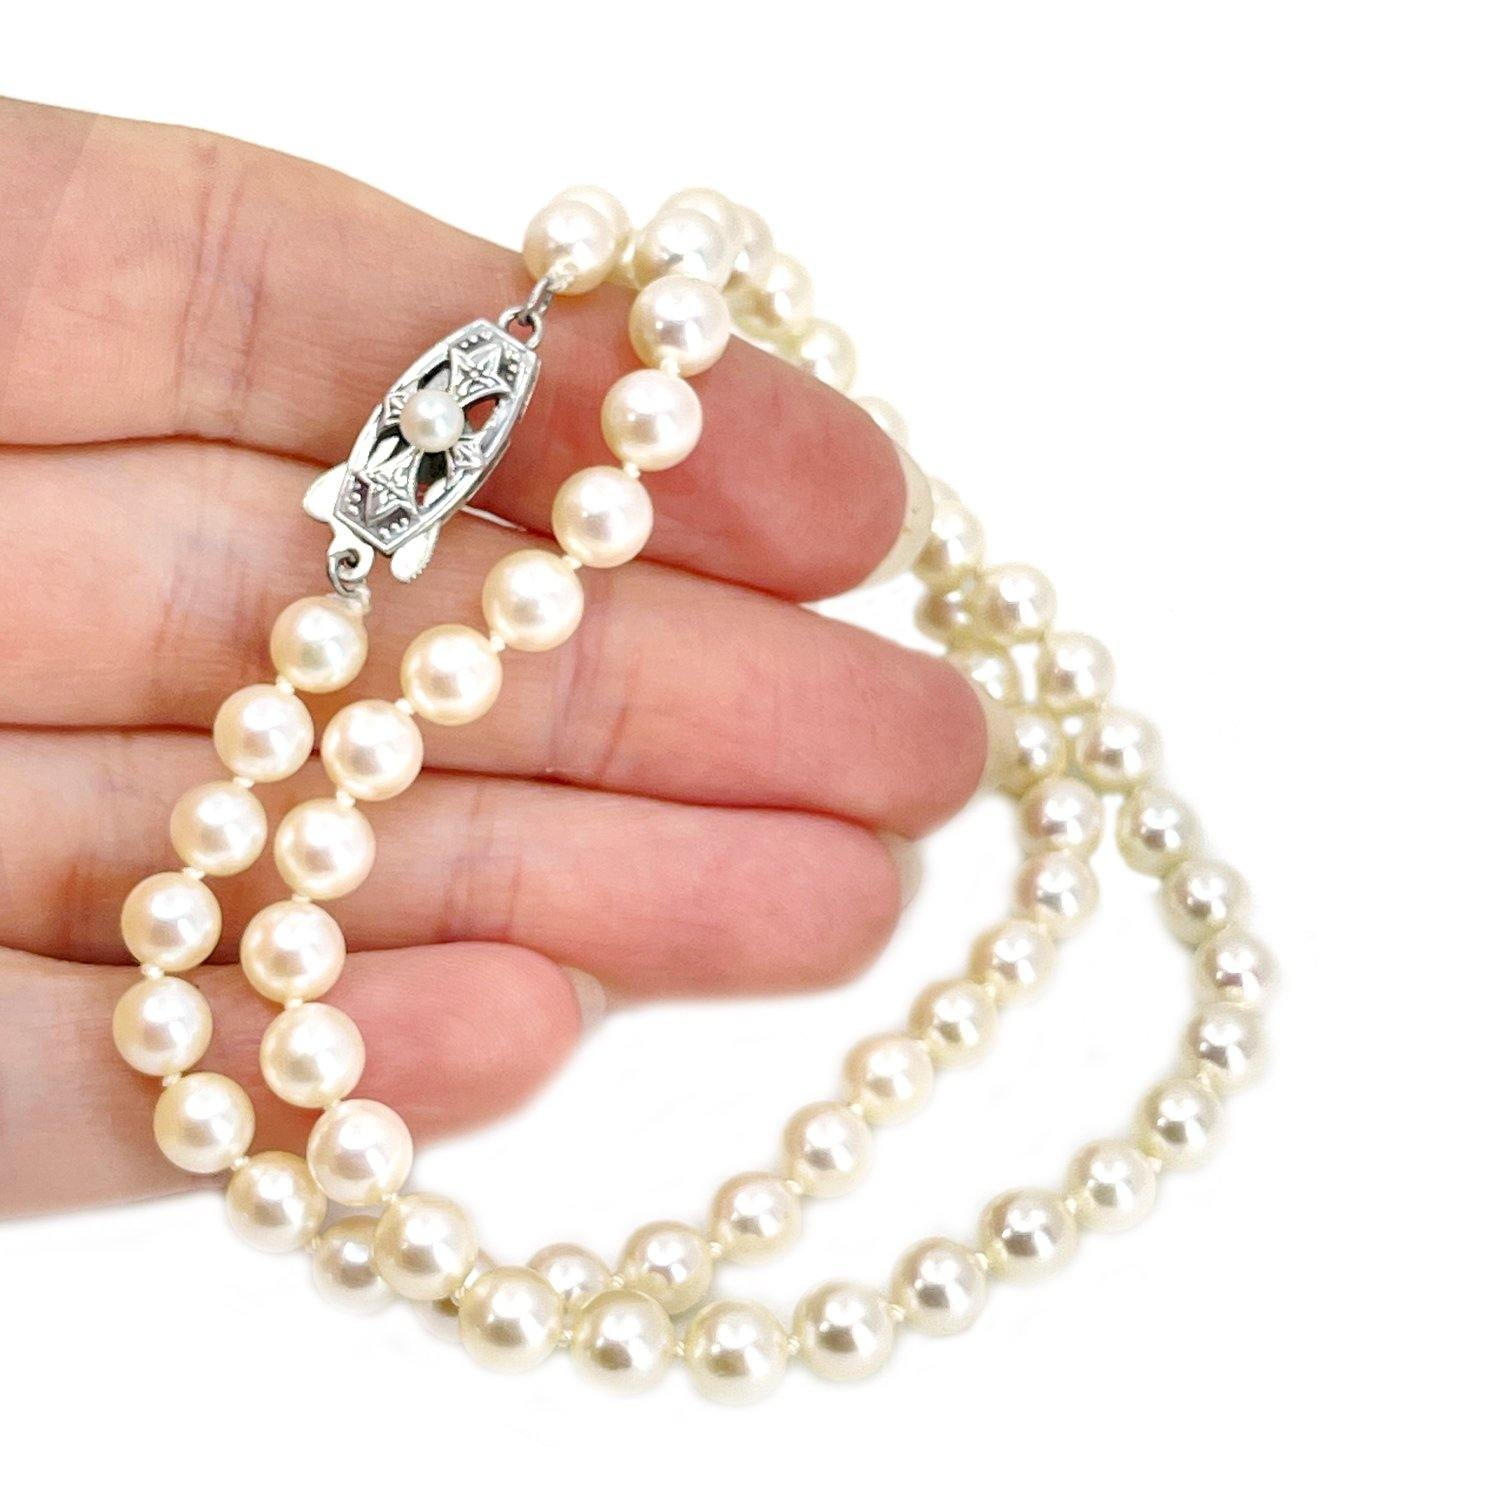 Mikimoto Japanese Cultured Akoya Pearl Strand With Box - Sterling Silver 16 Inch